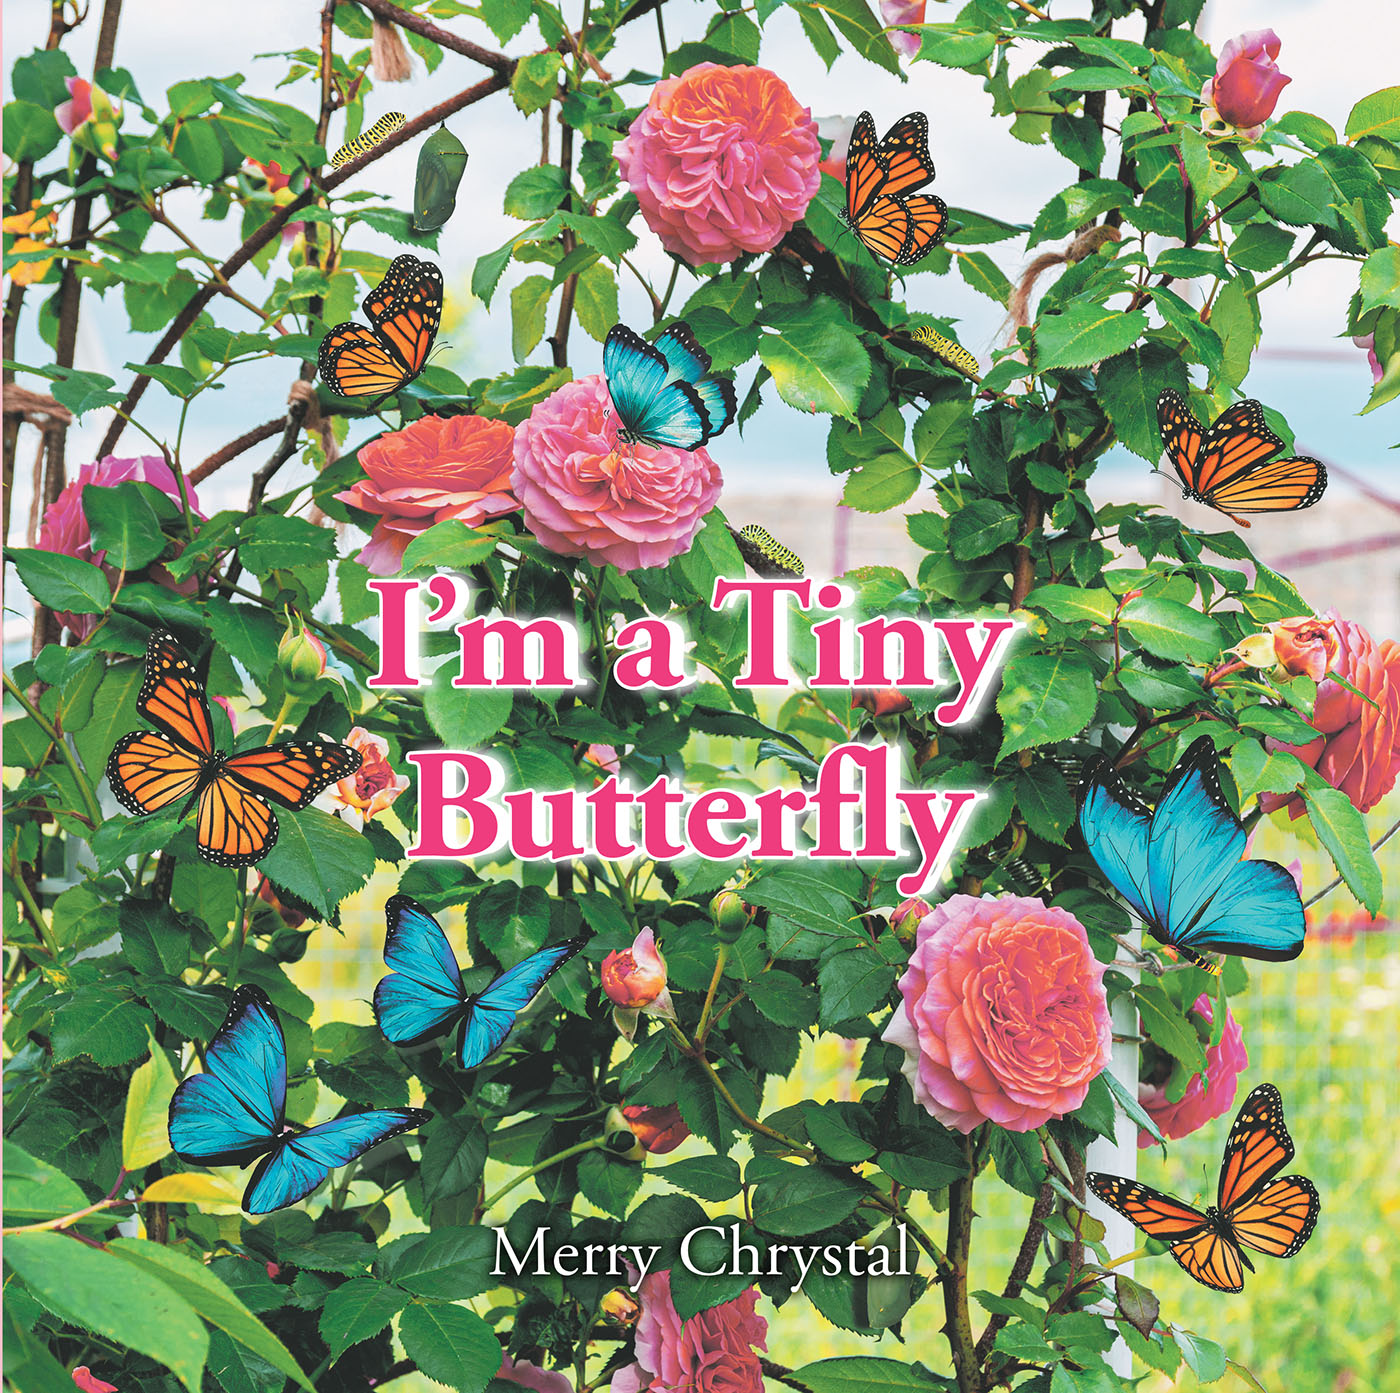 Merry Chrystal’s Newly Released "I’m a Tiny Butterfly" is an Impactful Message That Explores the Importance of Maintaining One’s Spirit